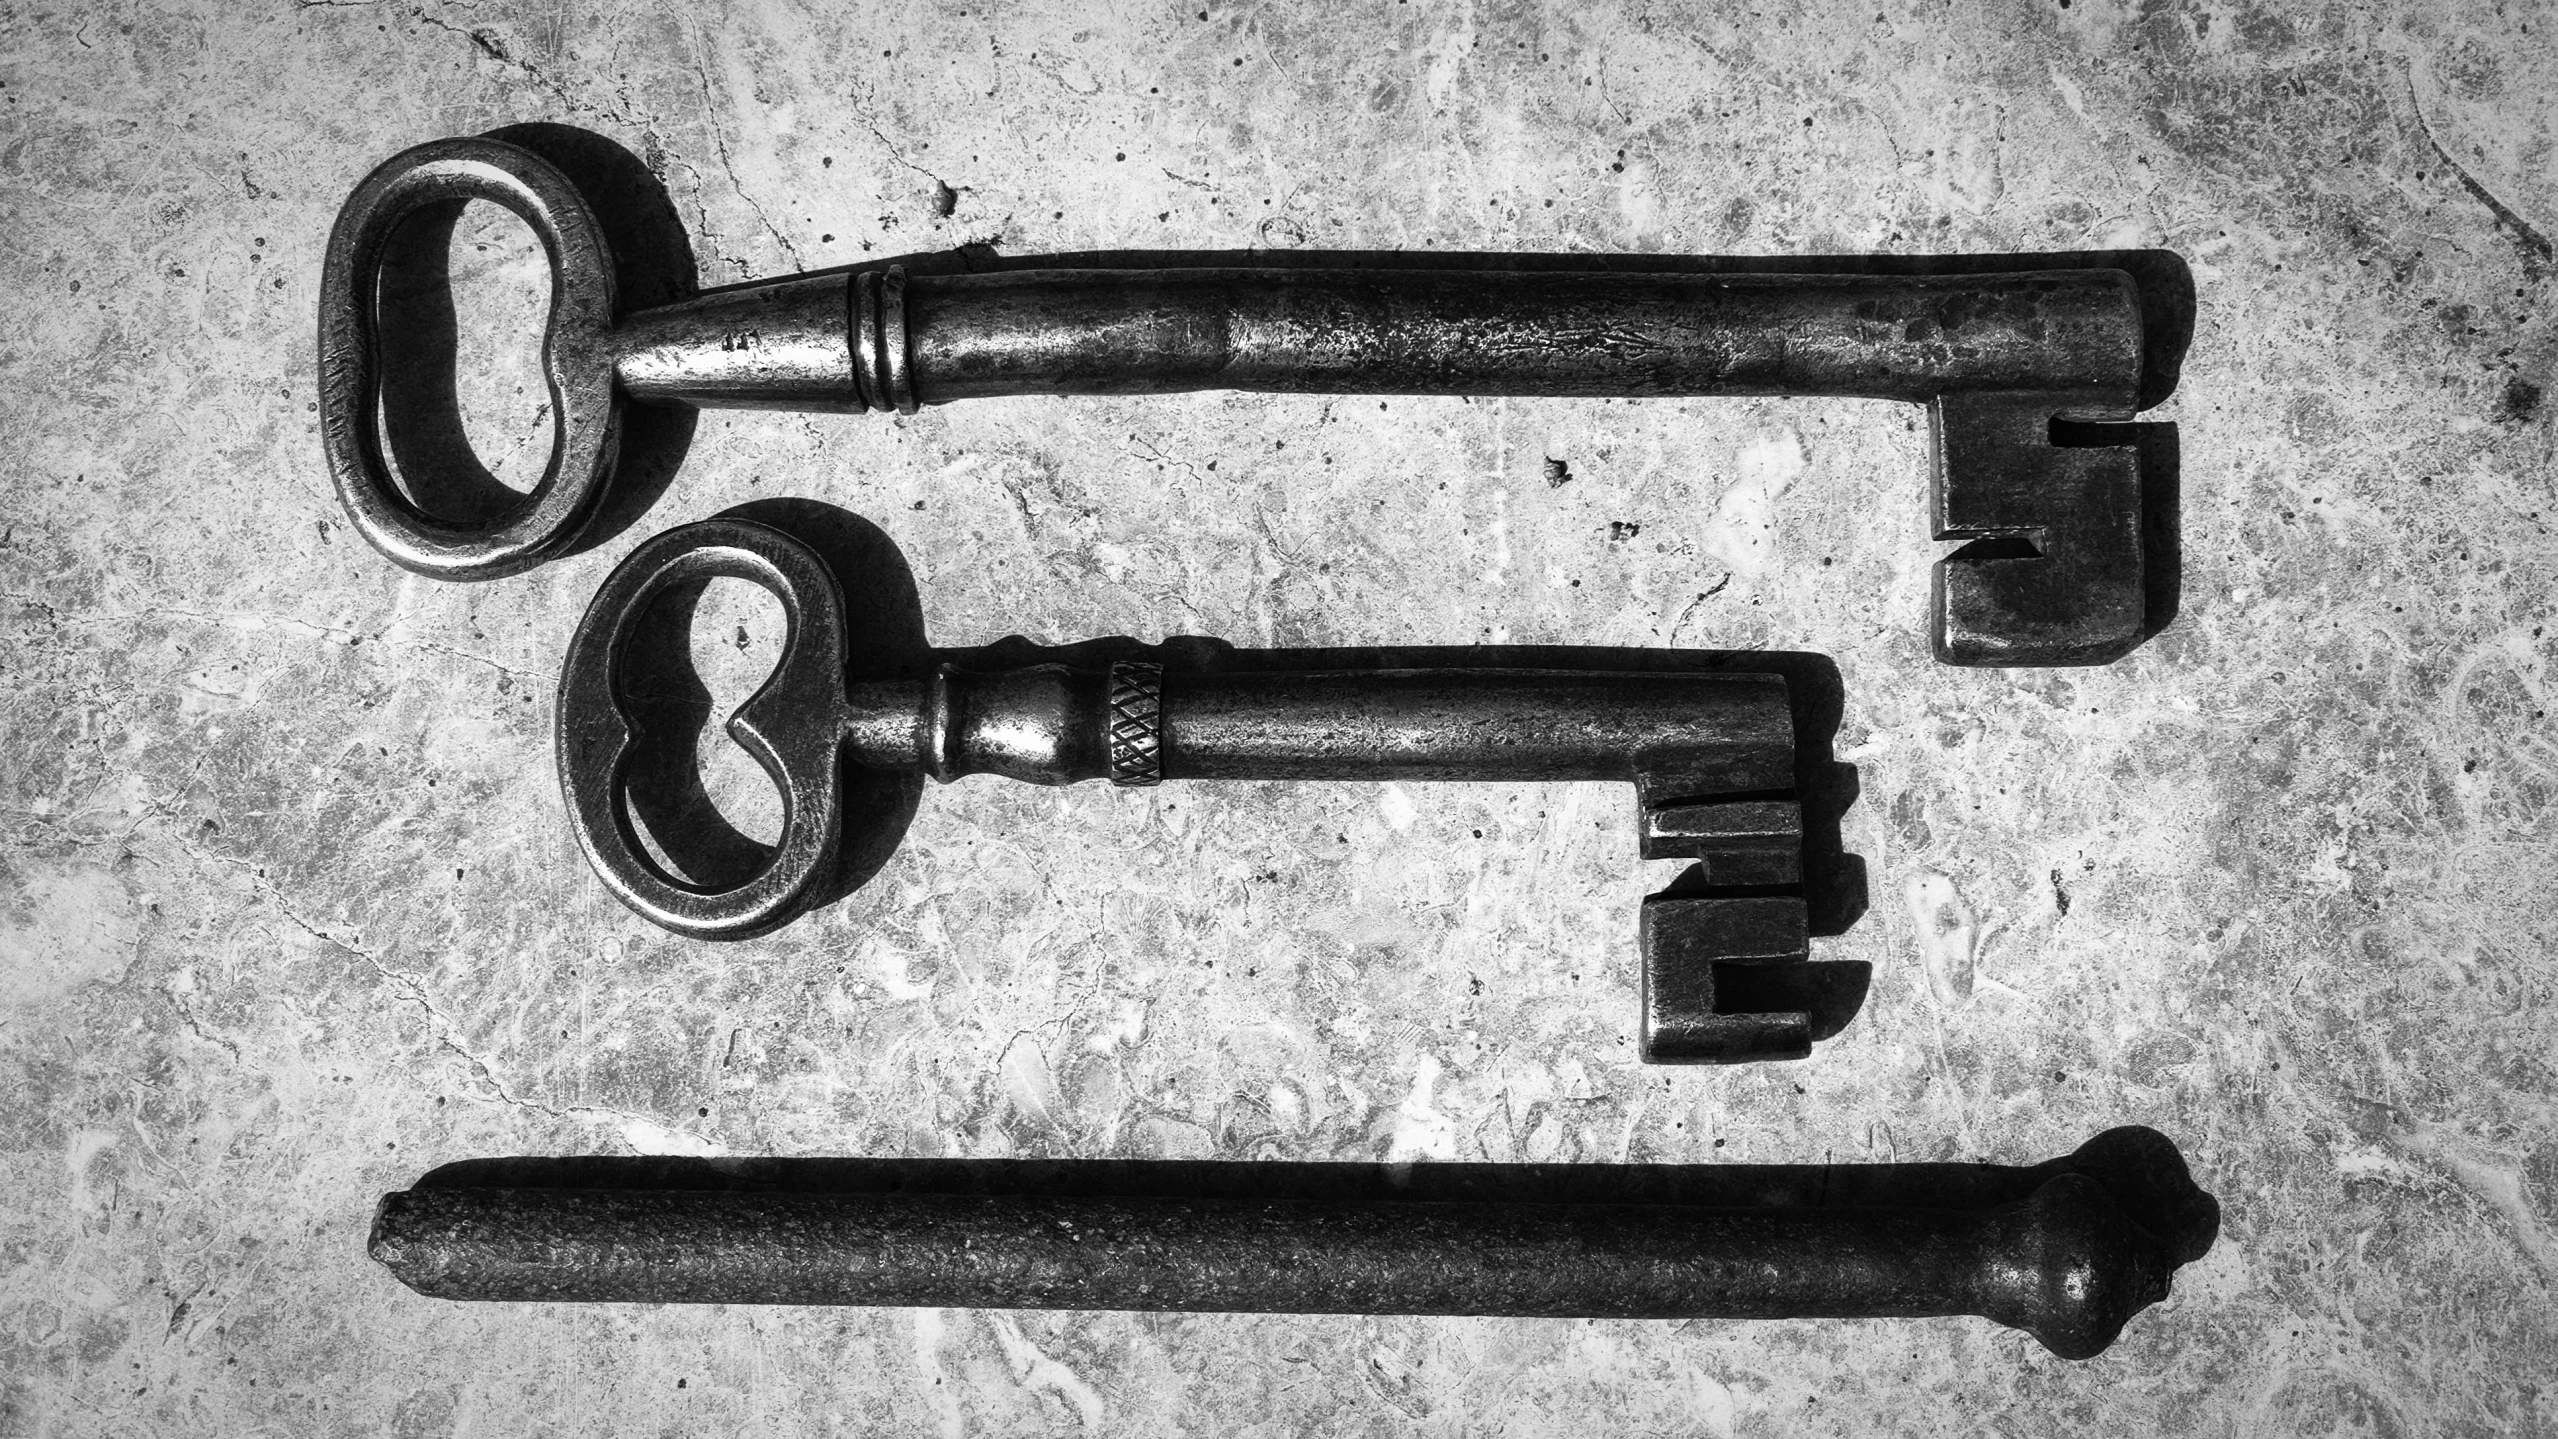 three rusty keys laying next to each other